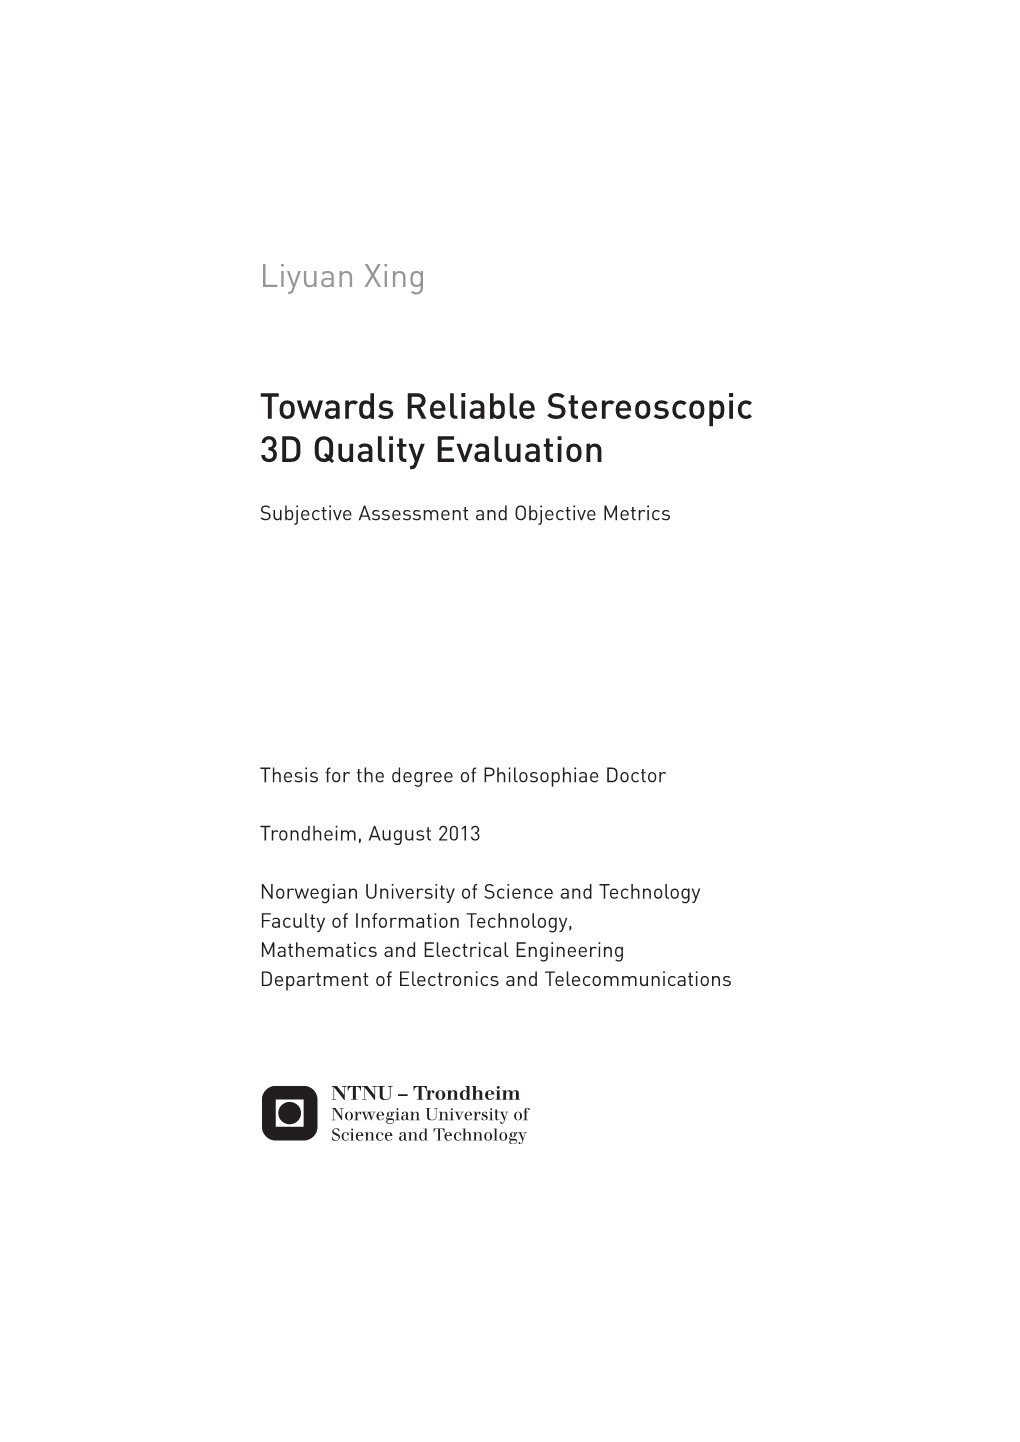 Towards Reliable Stereoscopic 3D Quality Evaluation